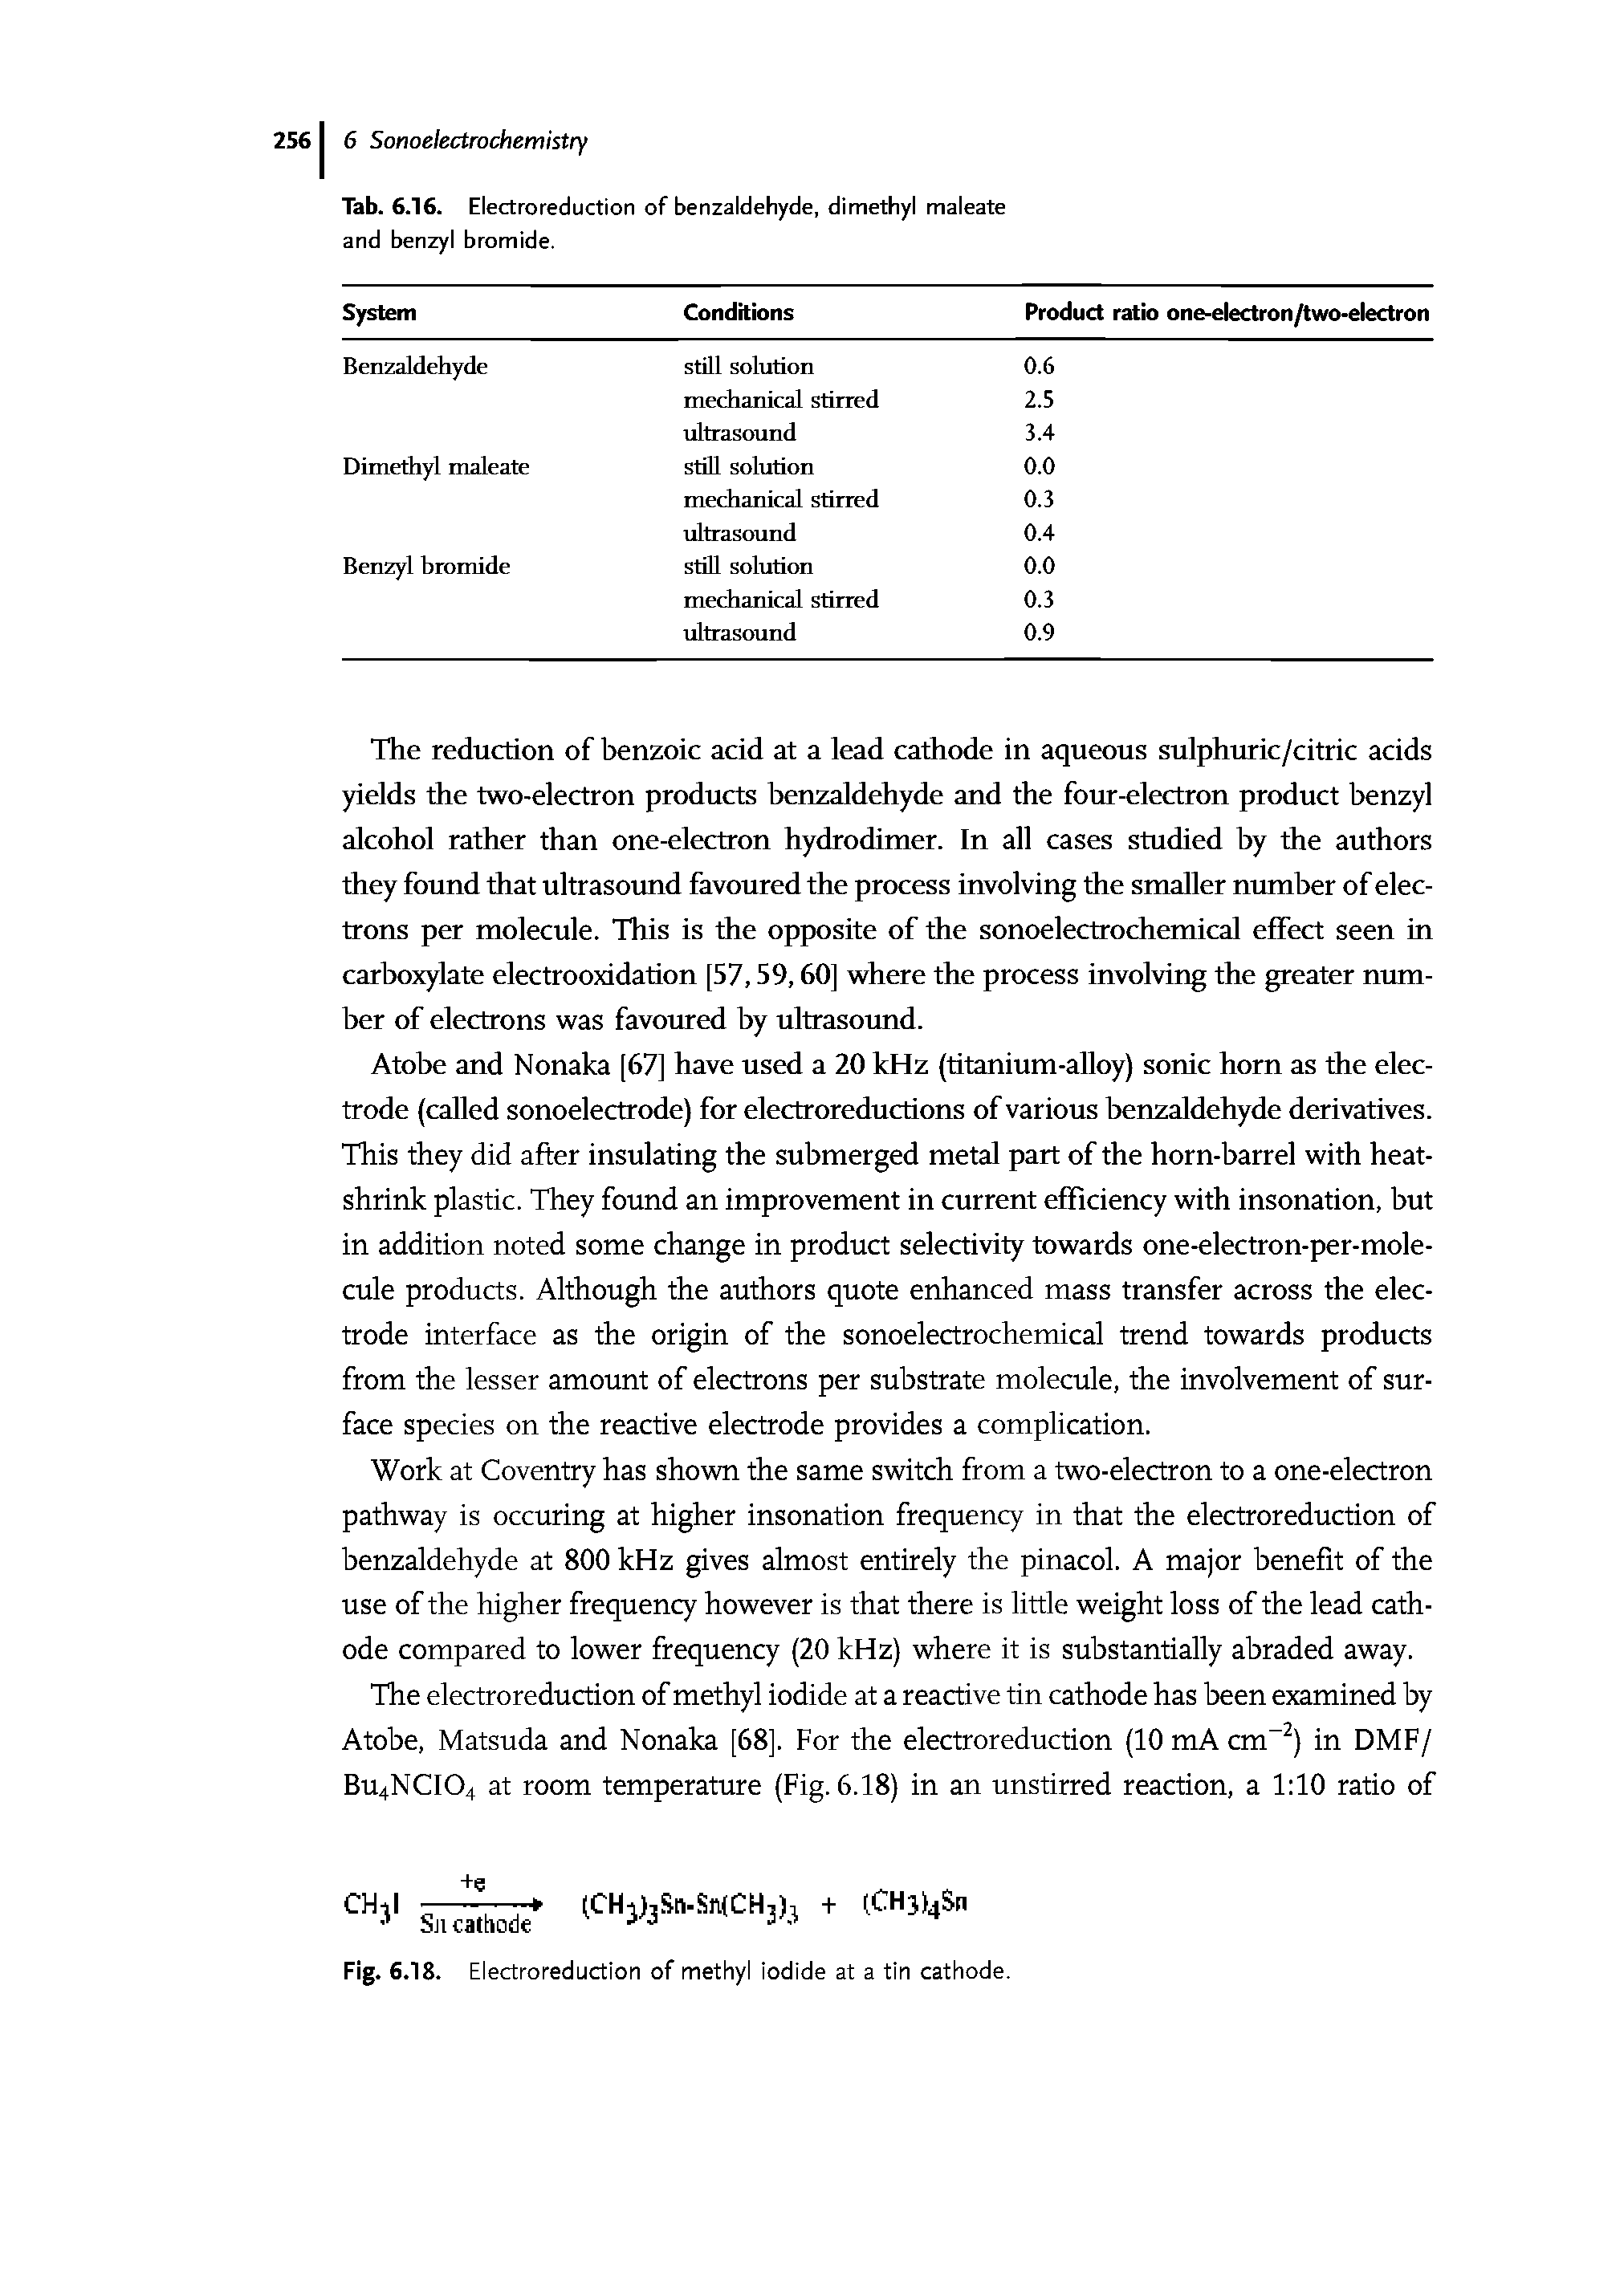 Tab. 6.16. Electroreduction of benzaldehyde, dimethyl maleate and benzyl bromide.